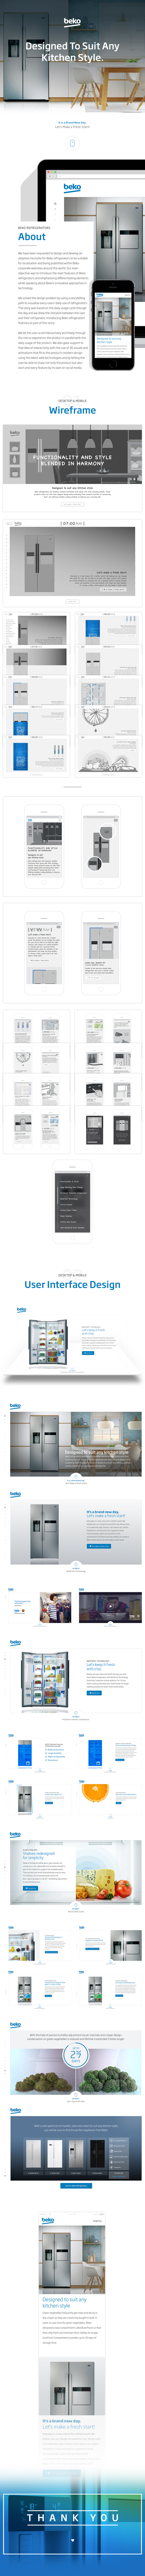 ux UI IxD user Experience Interface interaction design wireframes 3D Website microsite Production mobile Adaptive